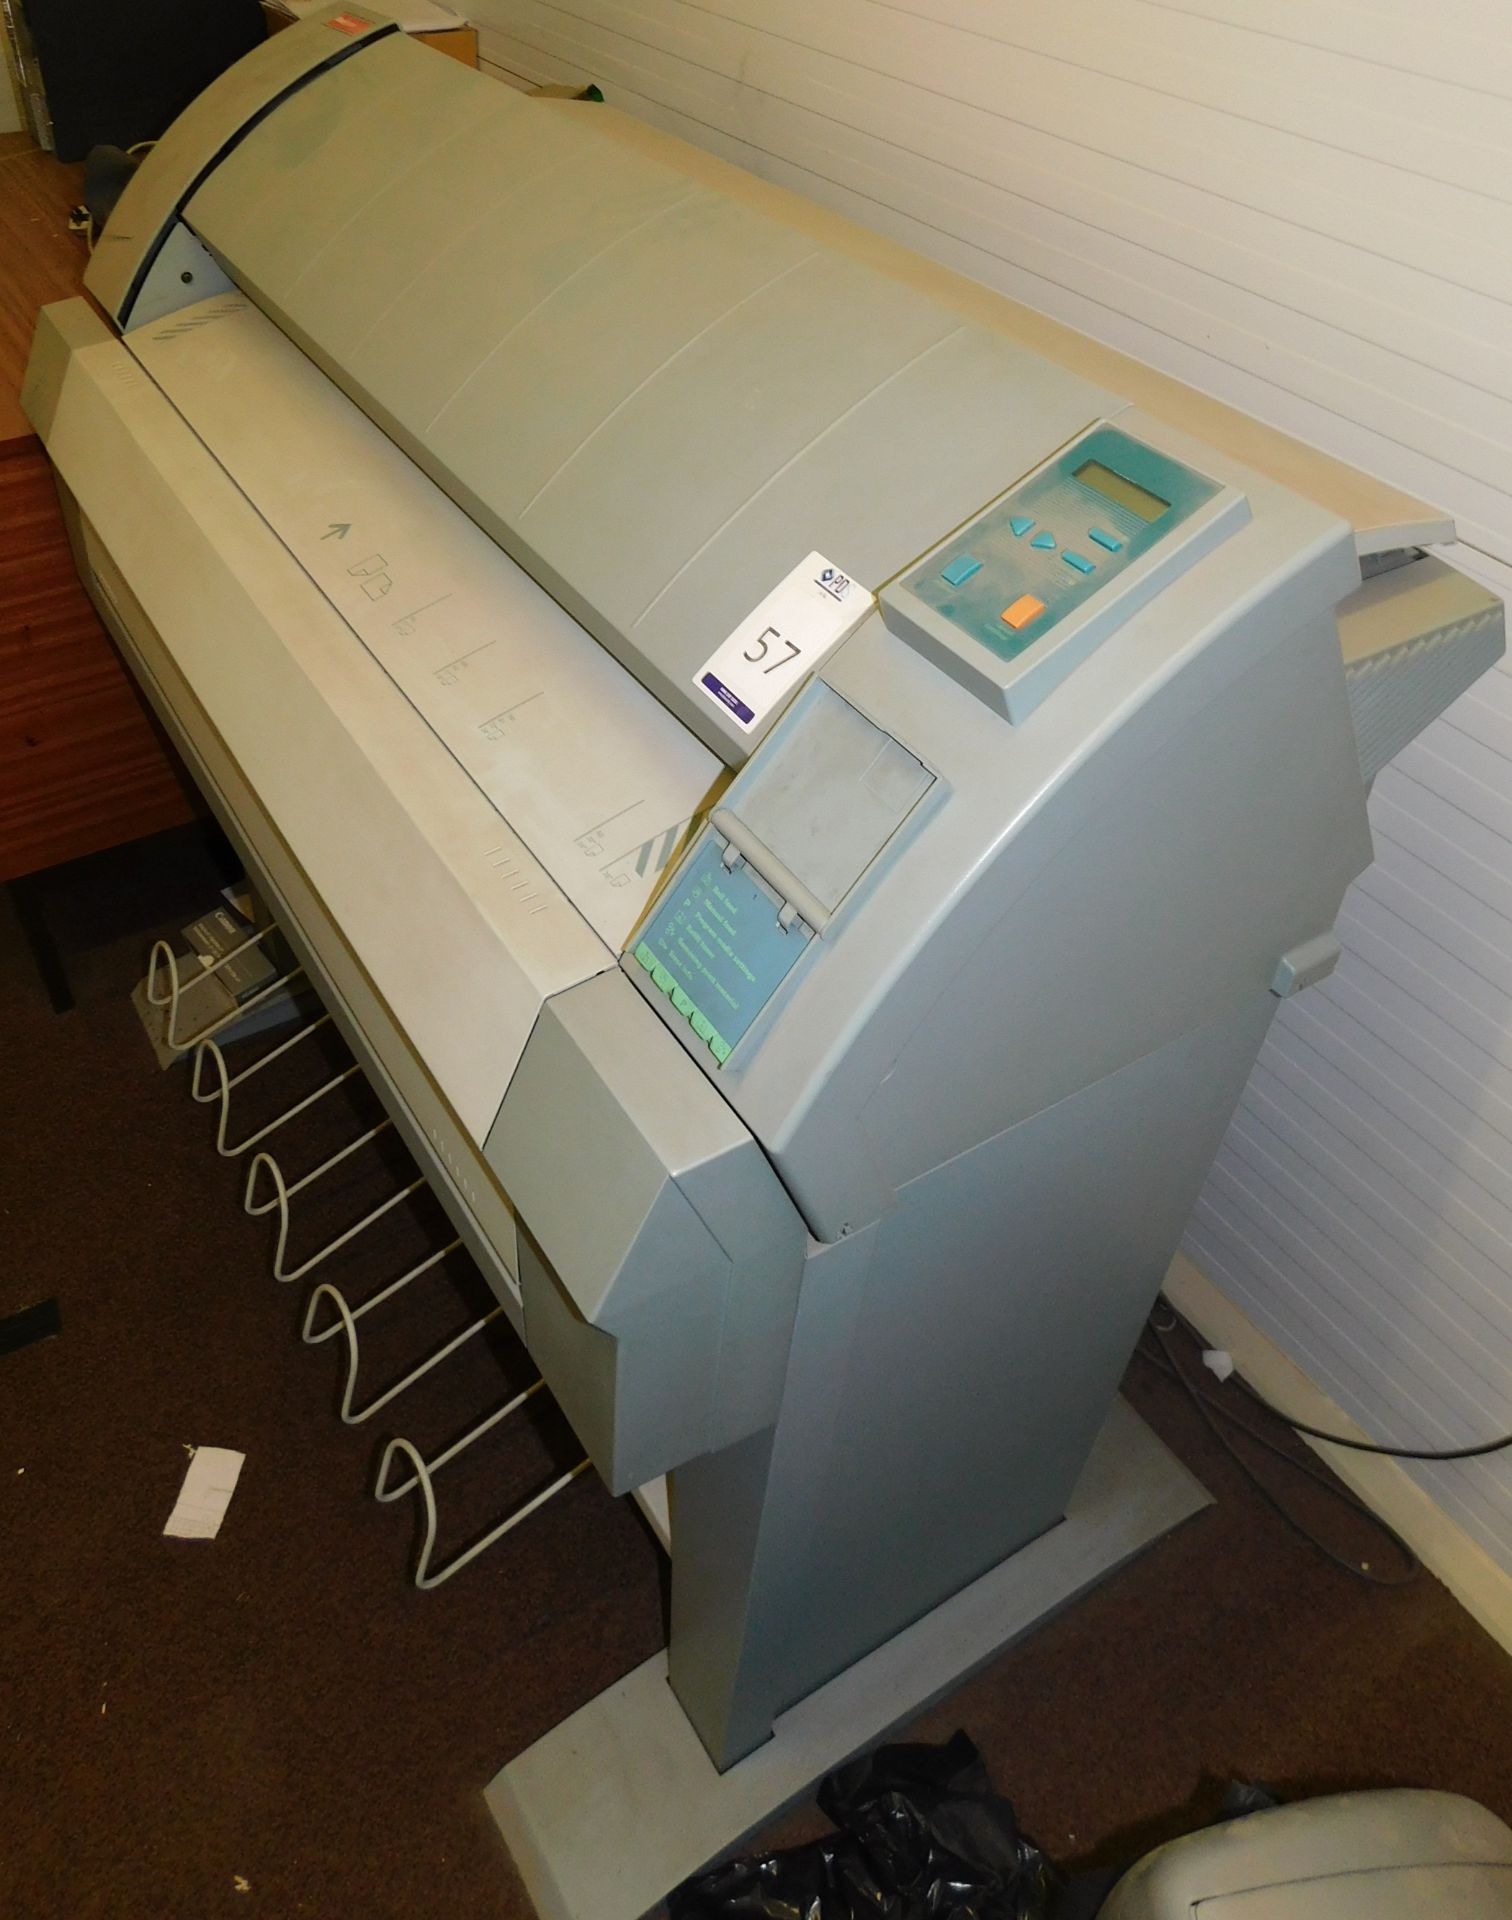 Oce 9300 Wide Format Printer (Located on Mezzanine) - Image 2 of 3